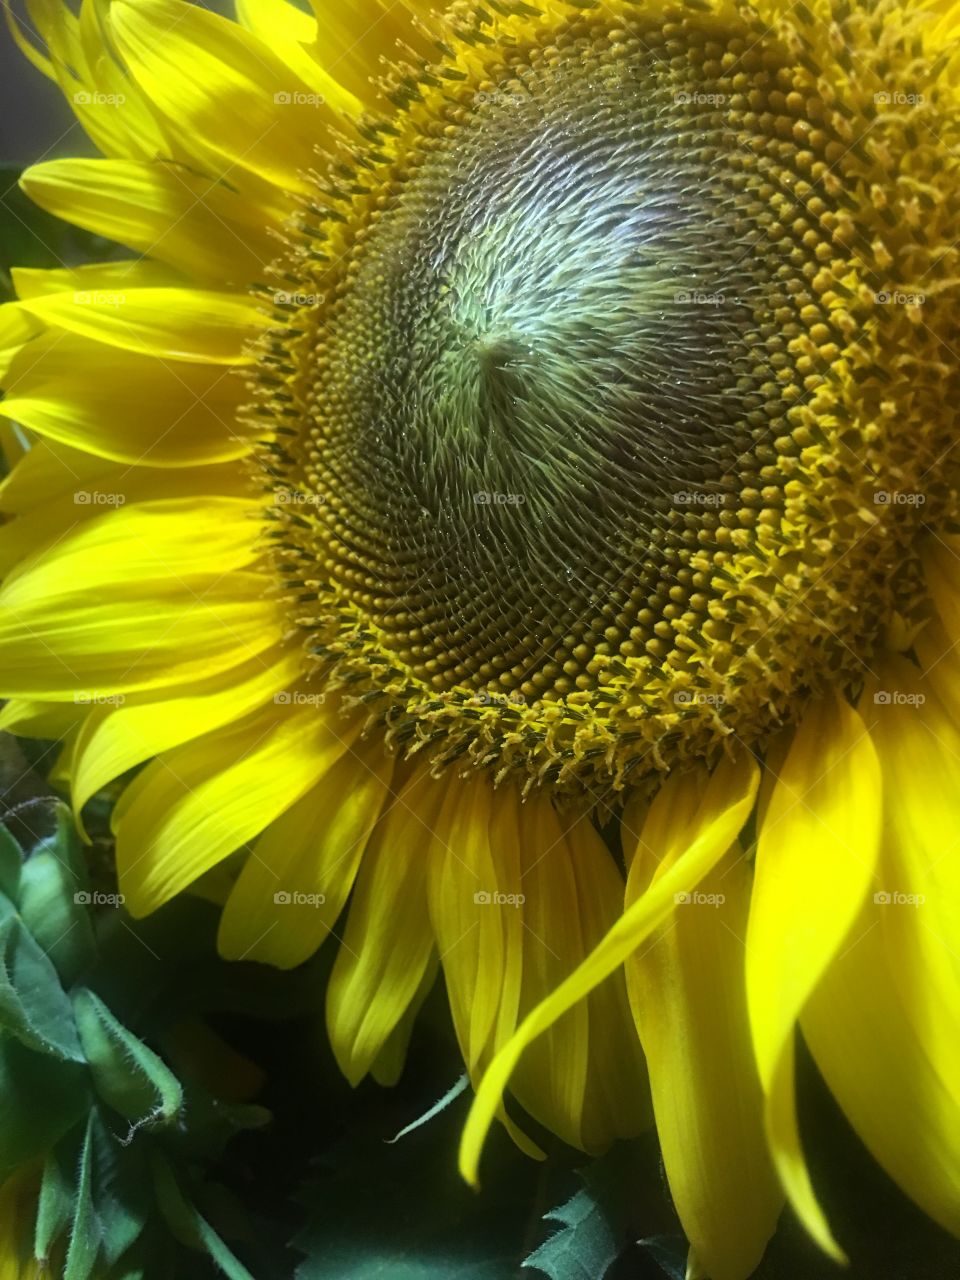 I personally believe the sunflower is the superman of all plants.